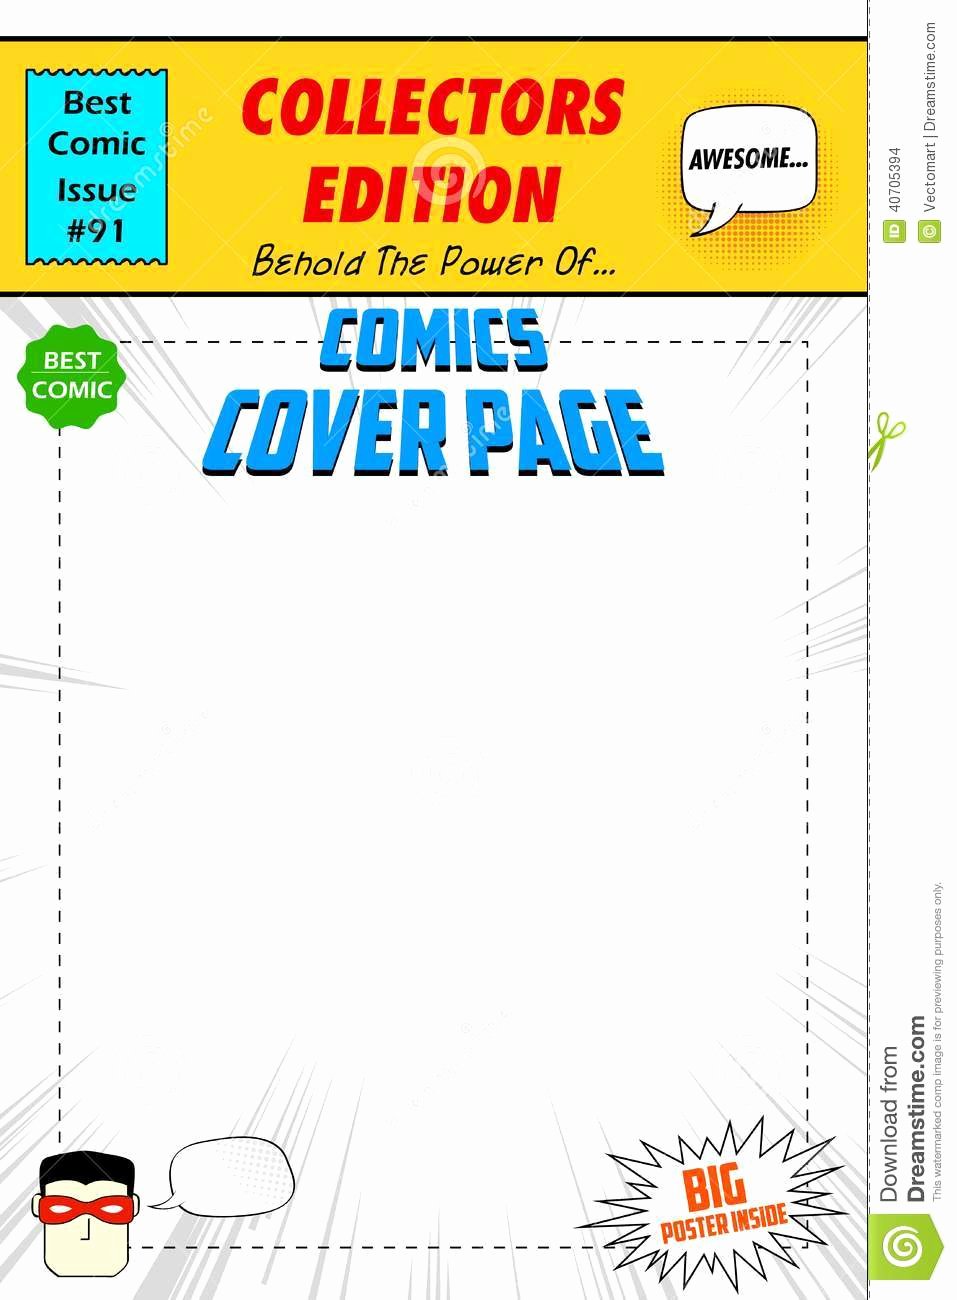 Comic Book Cover Template Best Of Ic Book Cover Stock Vector Image